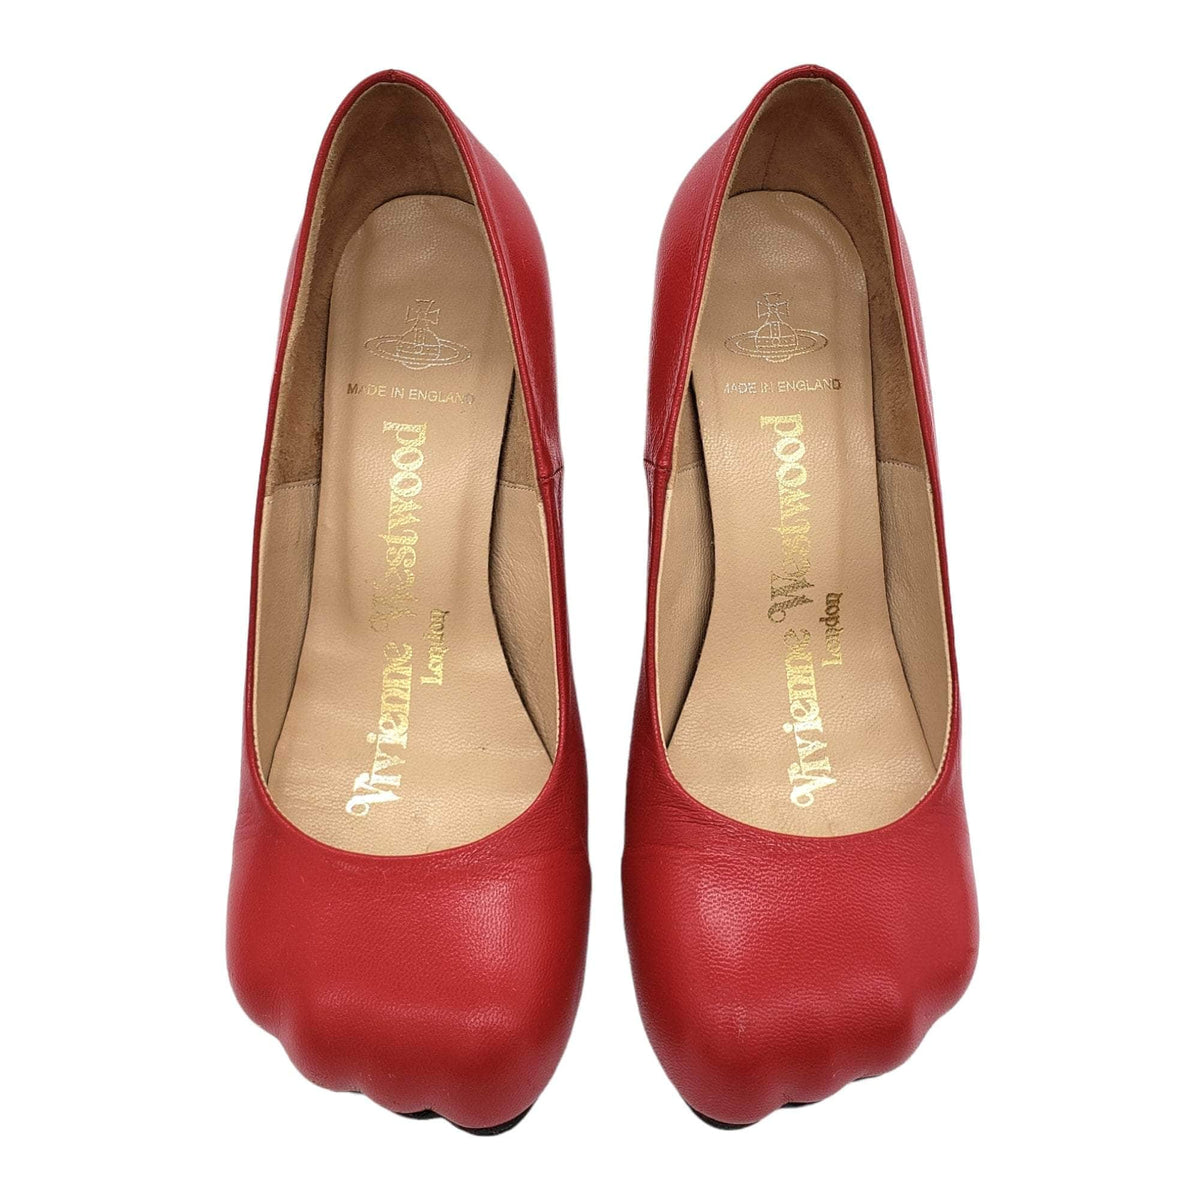 Vivienne Westwood Gold Label Red Leather Animal Toe Shoes